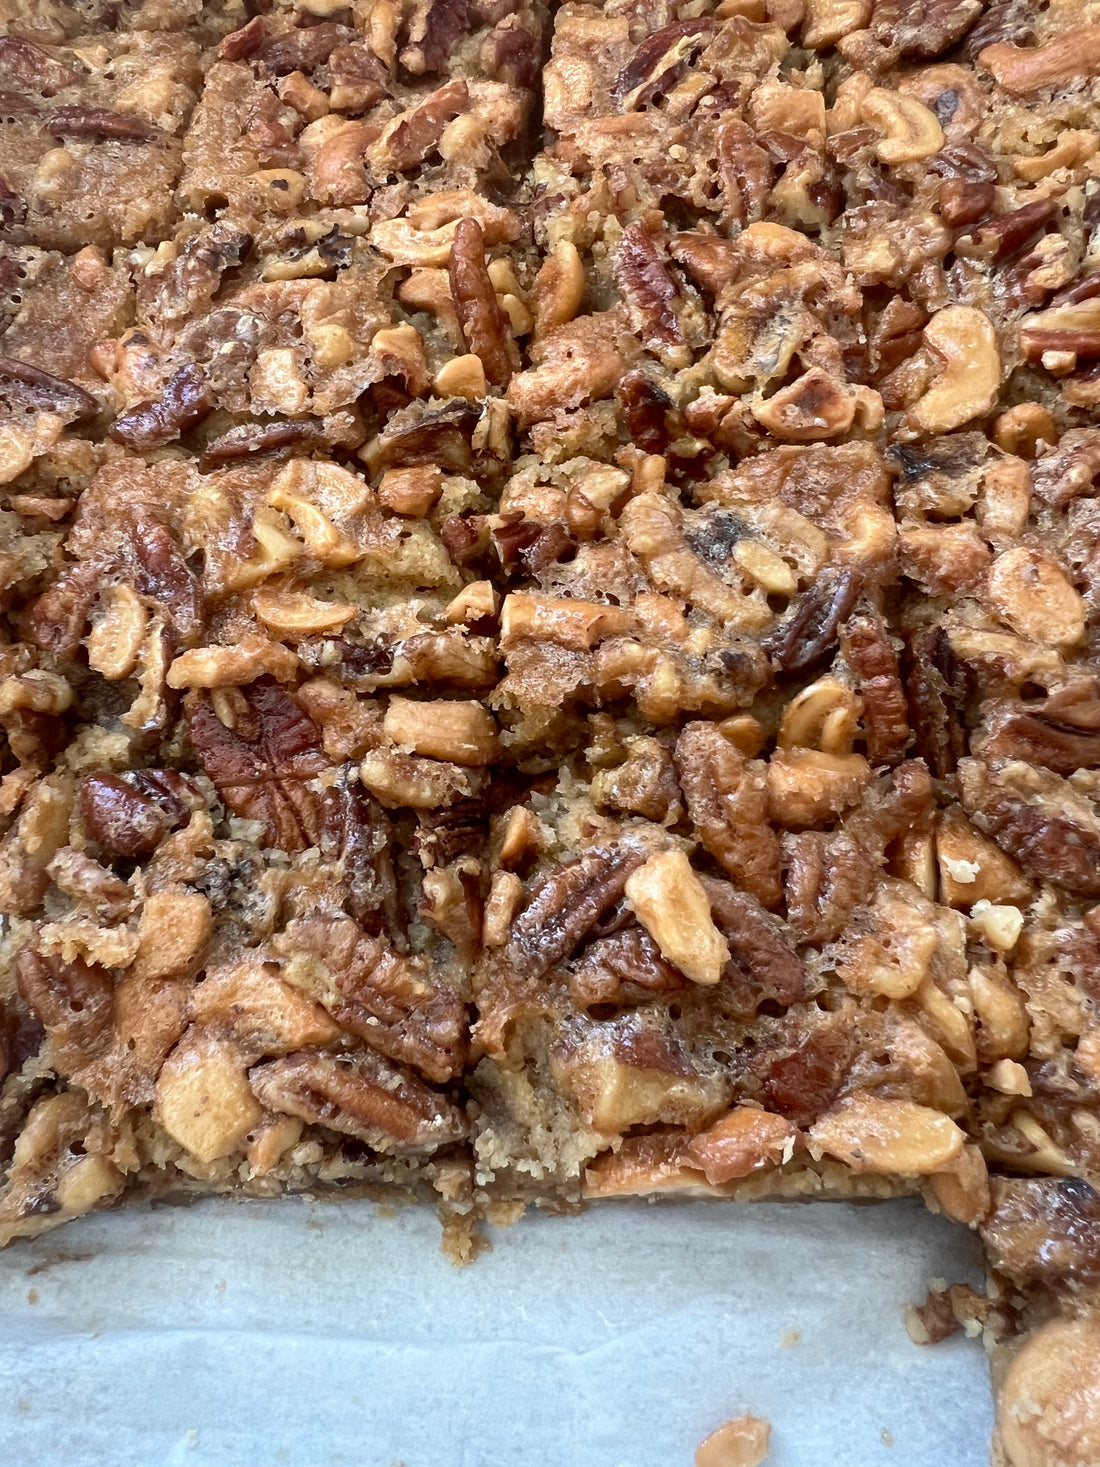 Power up up your morning with Maple Nut Power Bars!